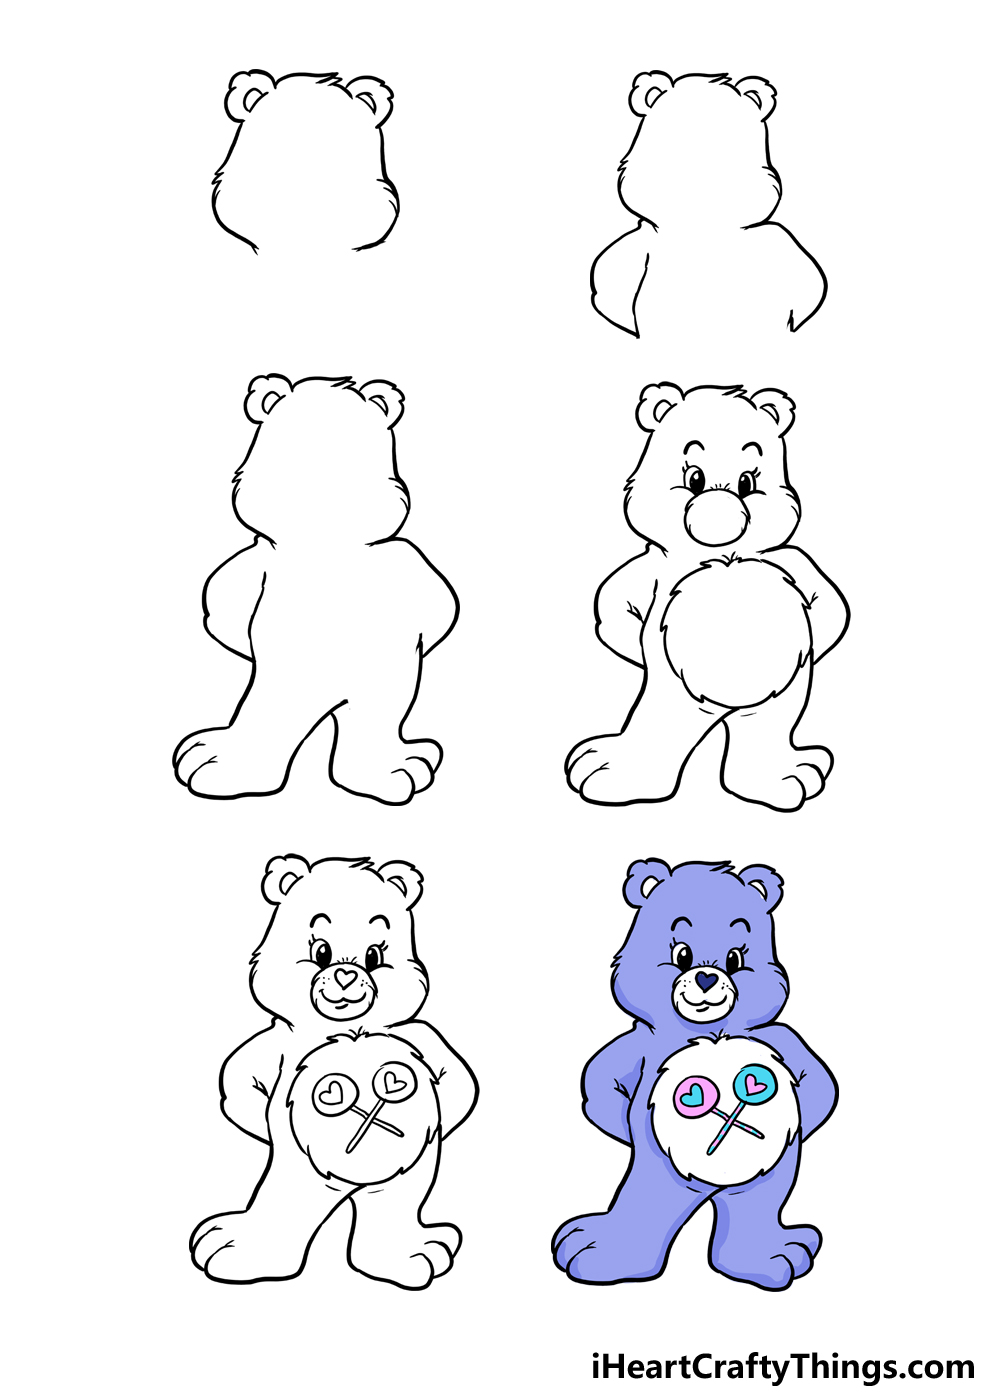 How to Draw A Care Bear